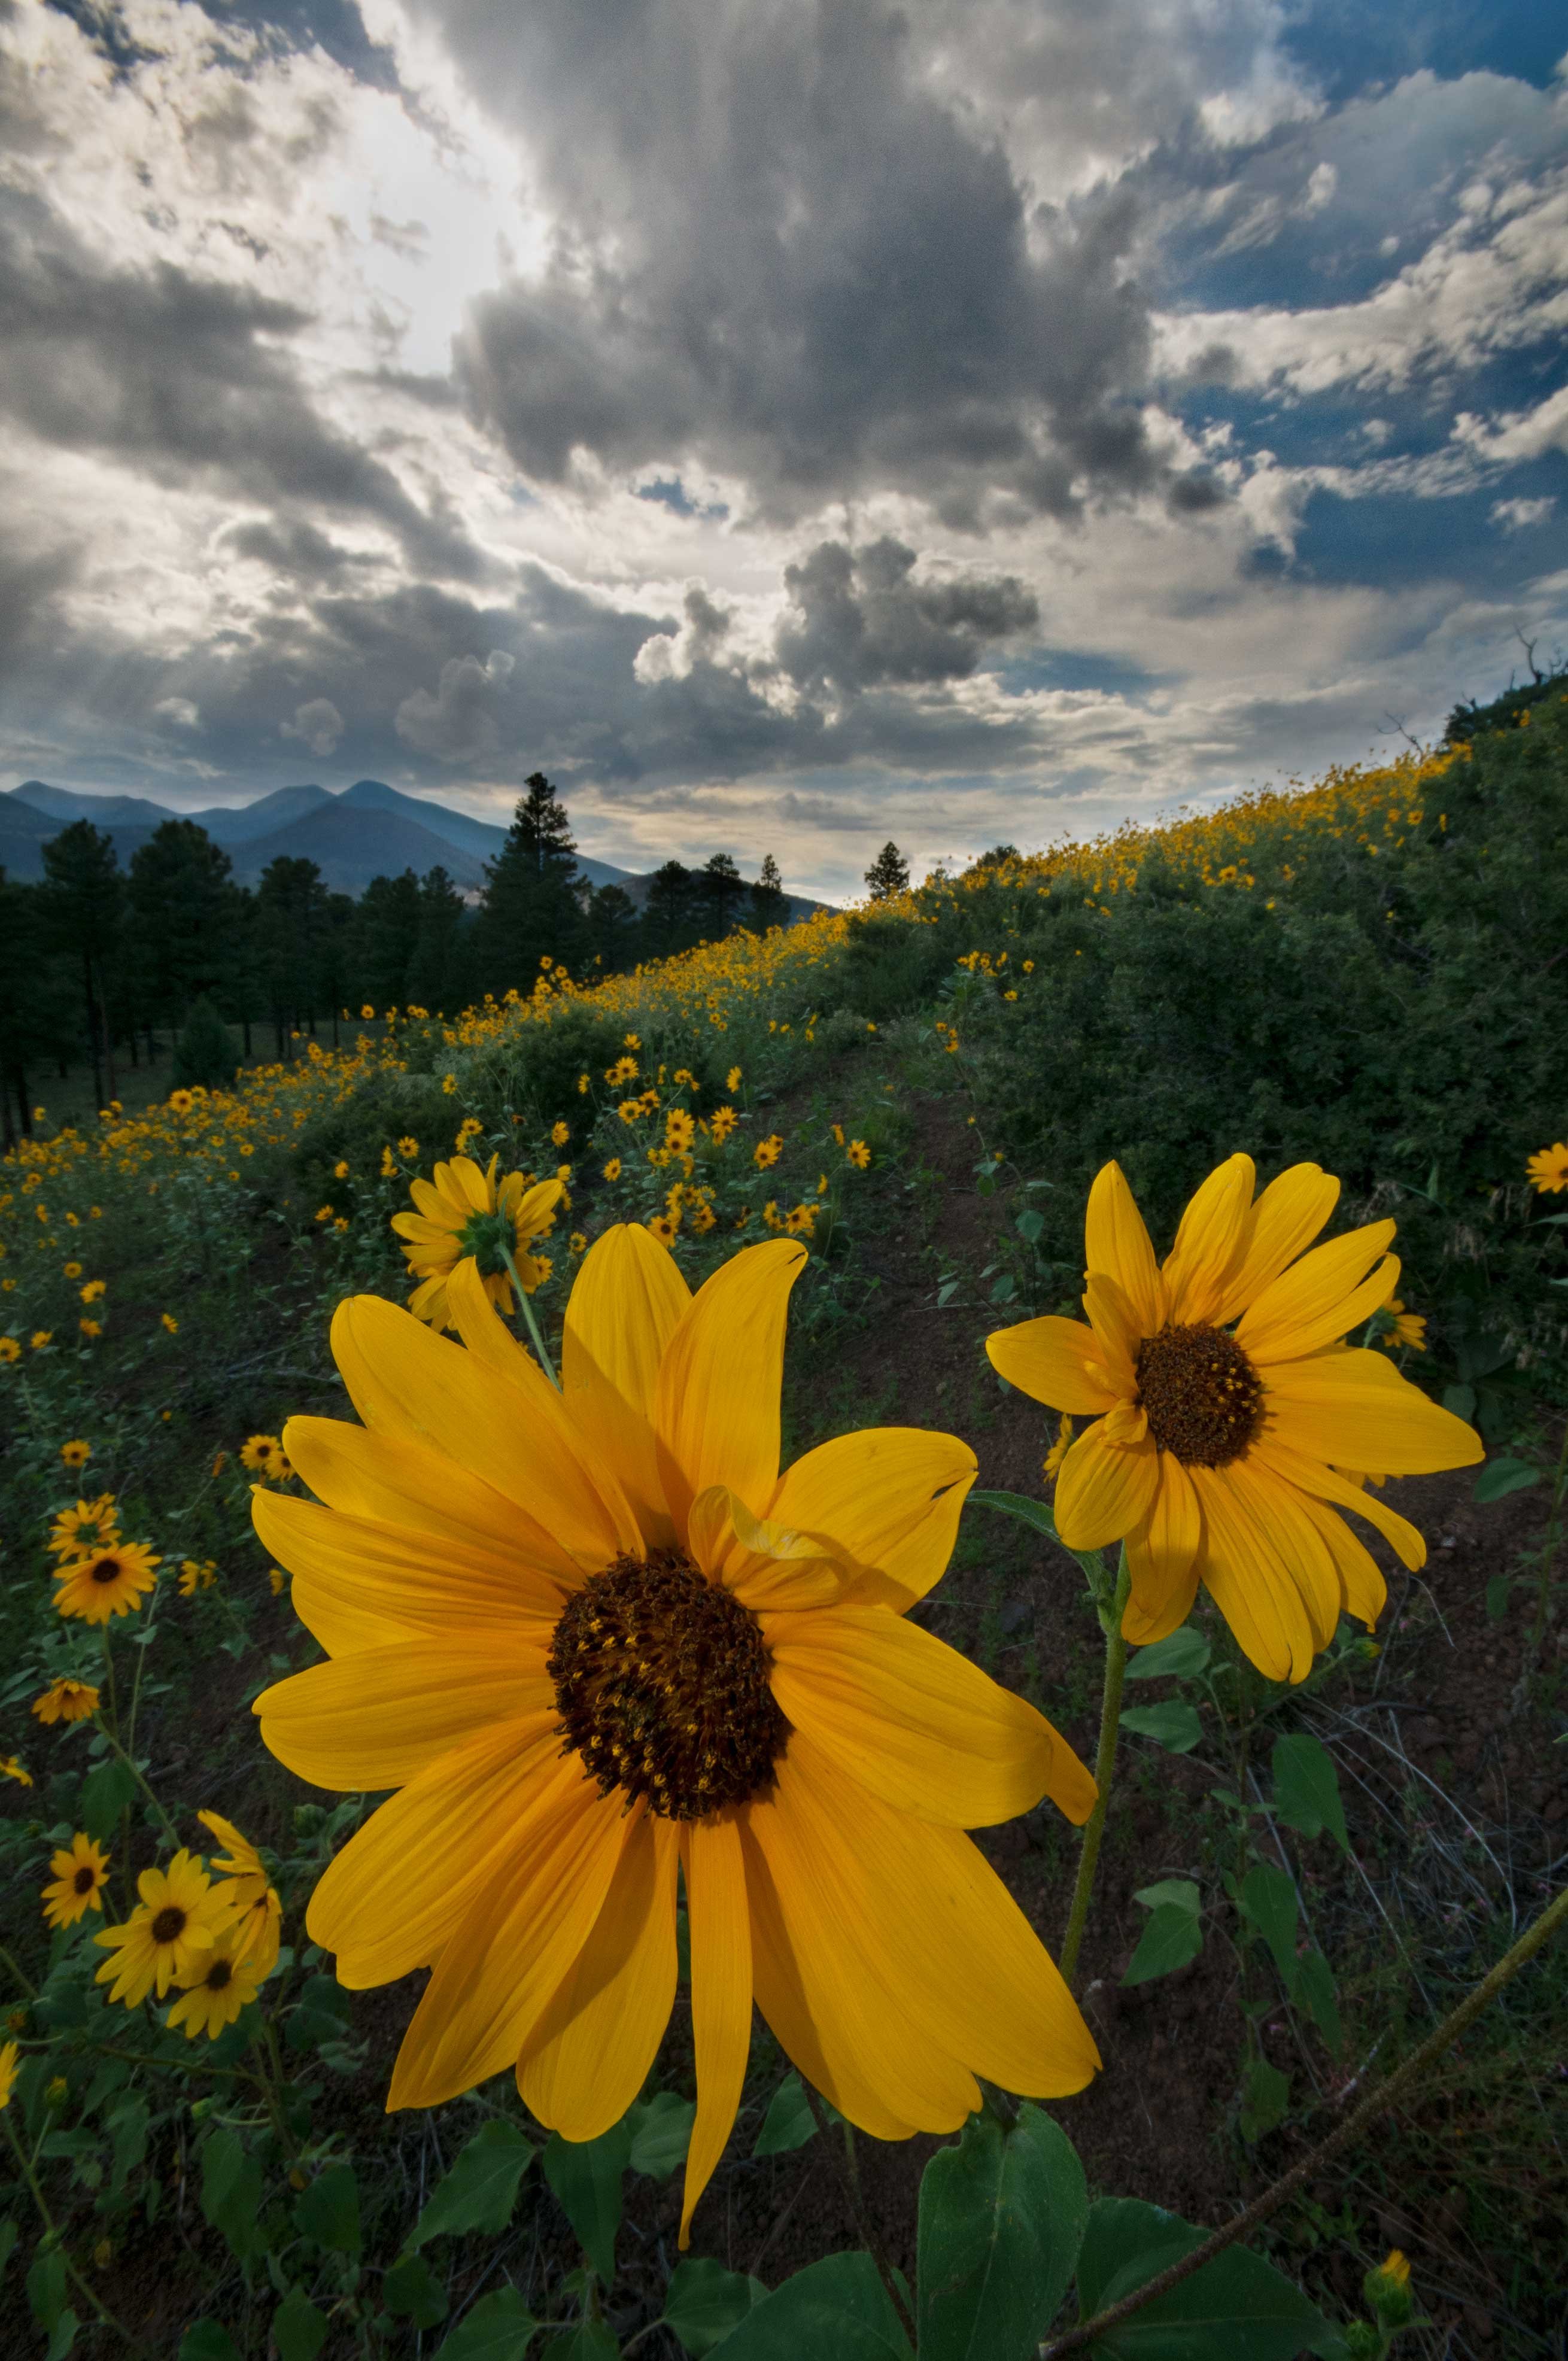 Wild sunflowers on Robinson Mt., Arizona, with the San Francisco Peaks in the distance